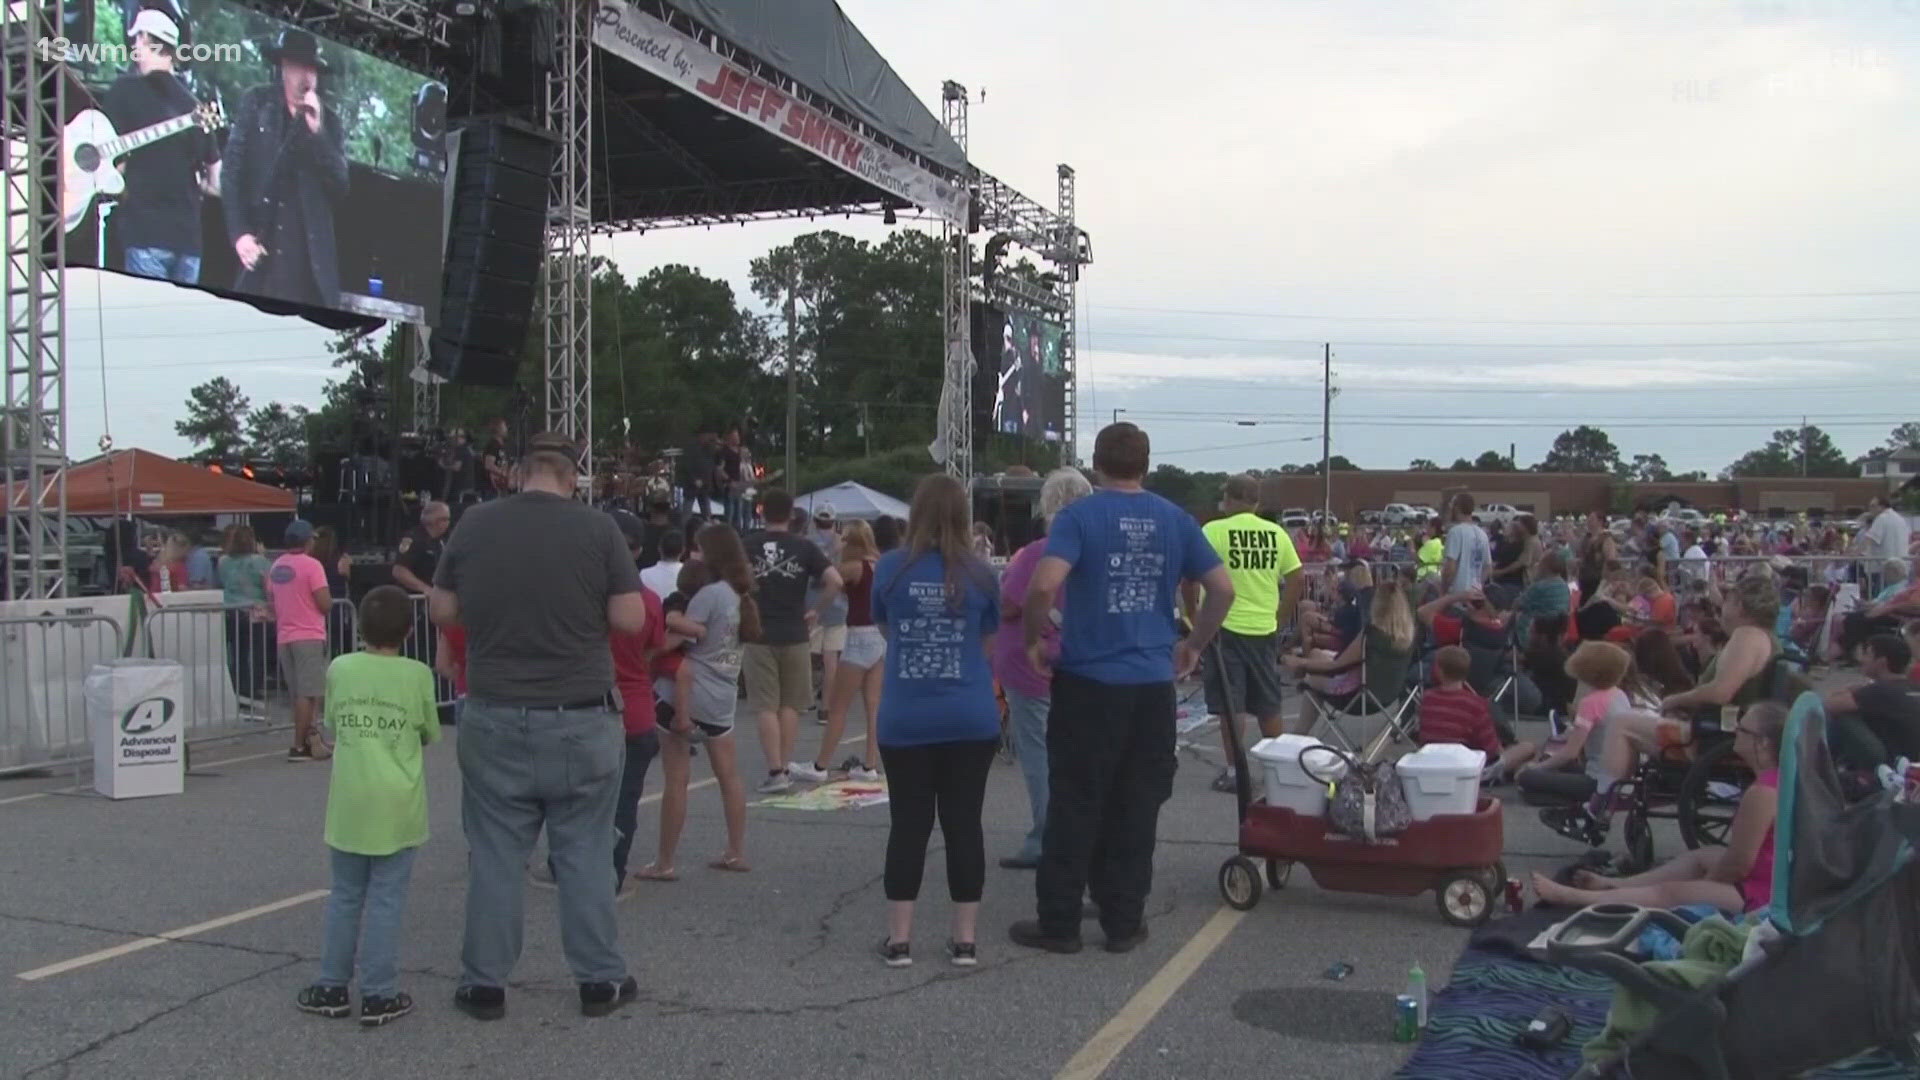 The Independence Day Concert is slated for June 29.